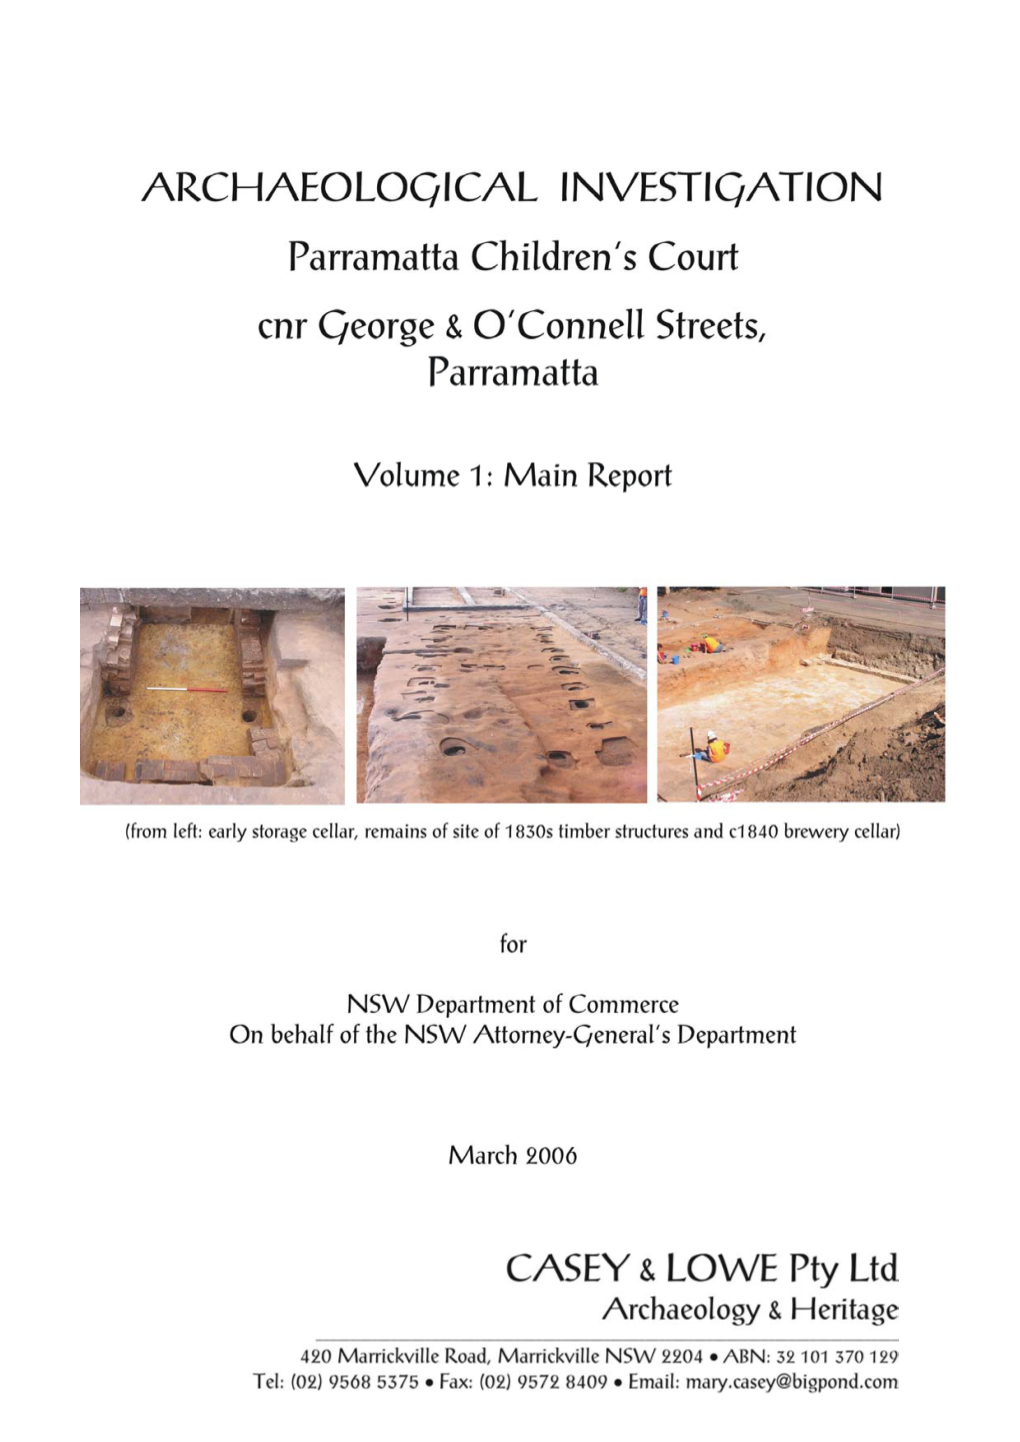 Report and Will Continue to Be Over a Series of Further Archaeological Reports on Similar Sites in Parramatta